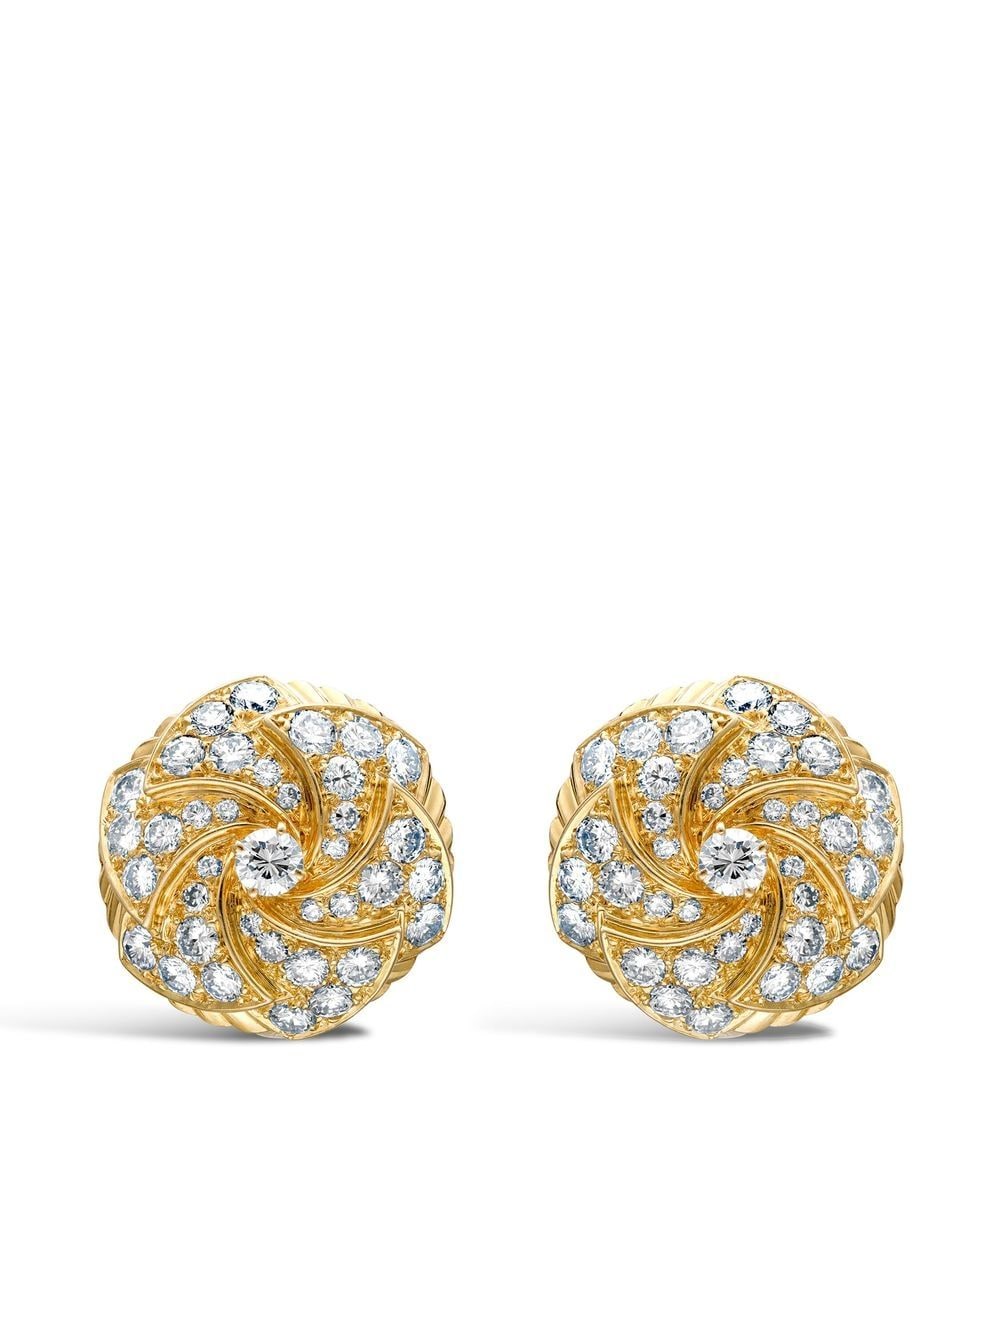 Cartier 1960s pre-owned 18kt yellow gold diamond clip earrings von Cartier